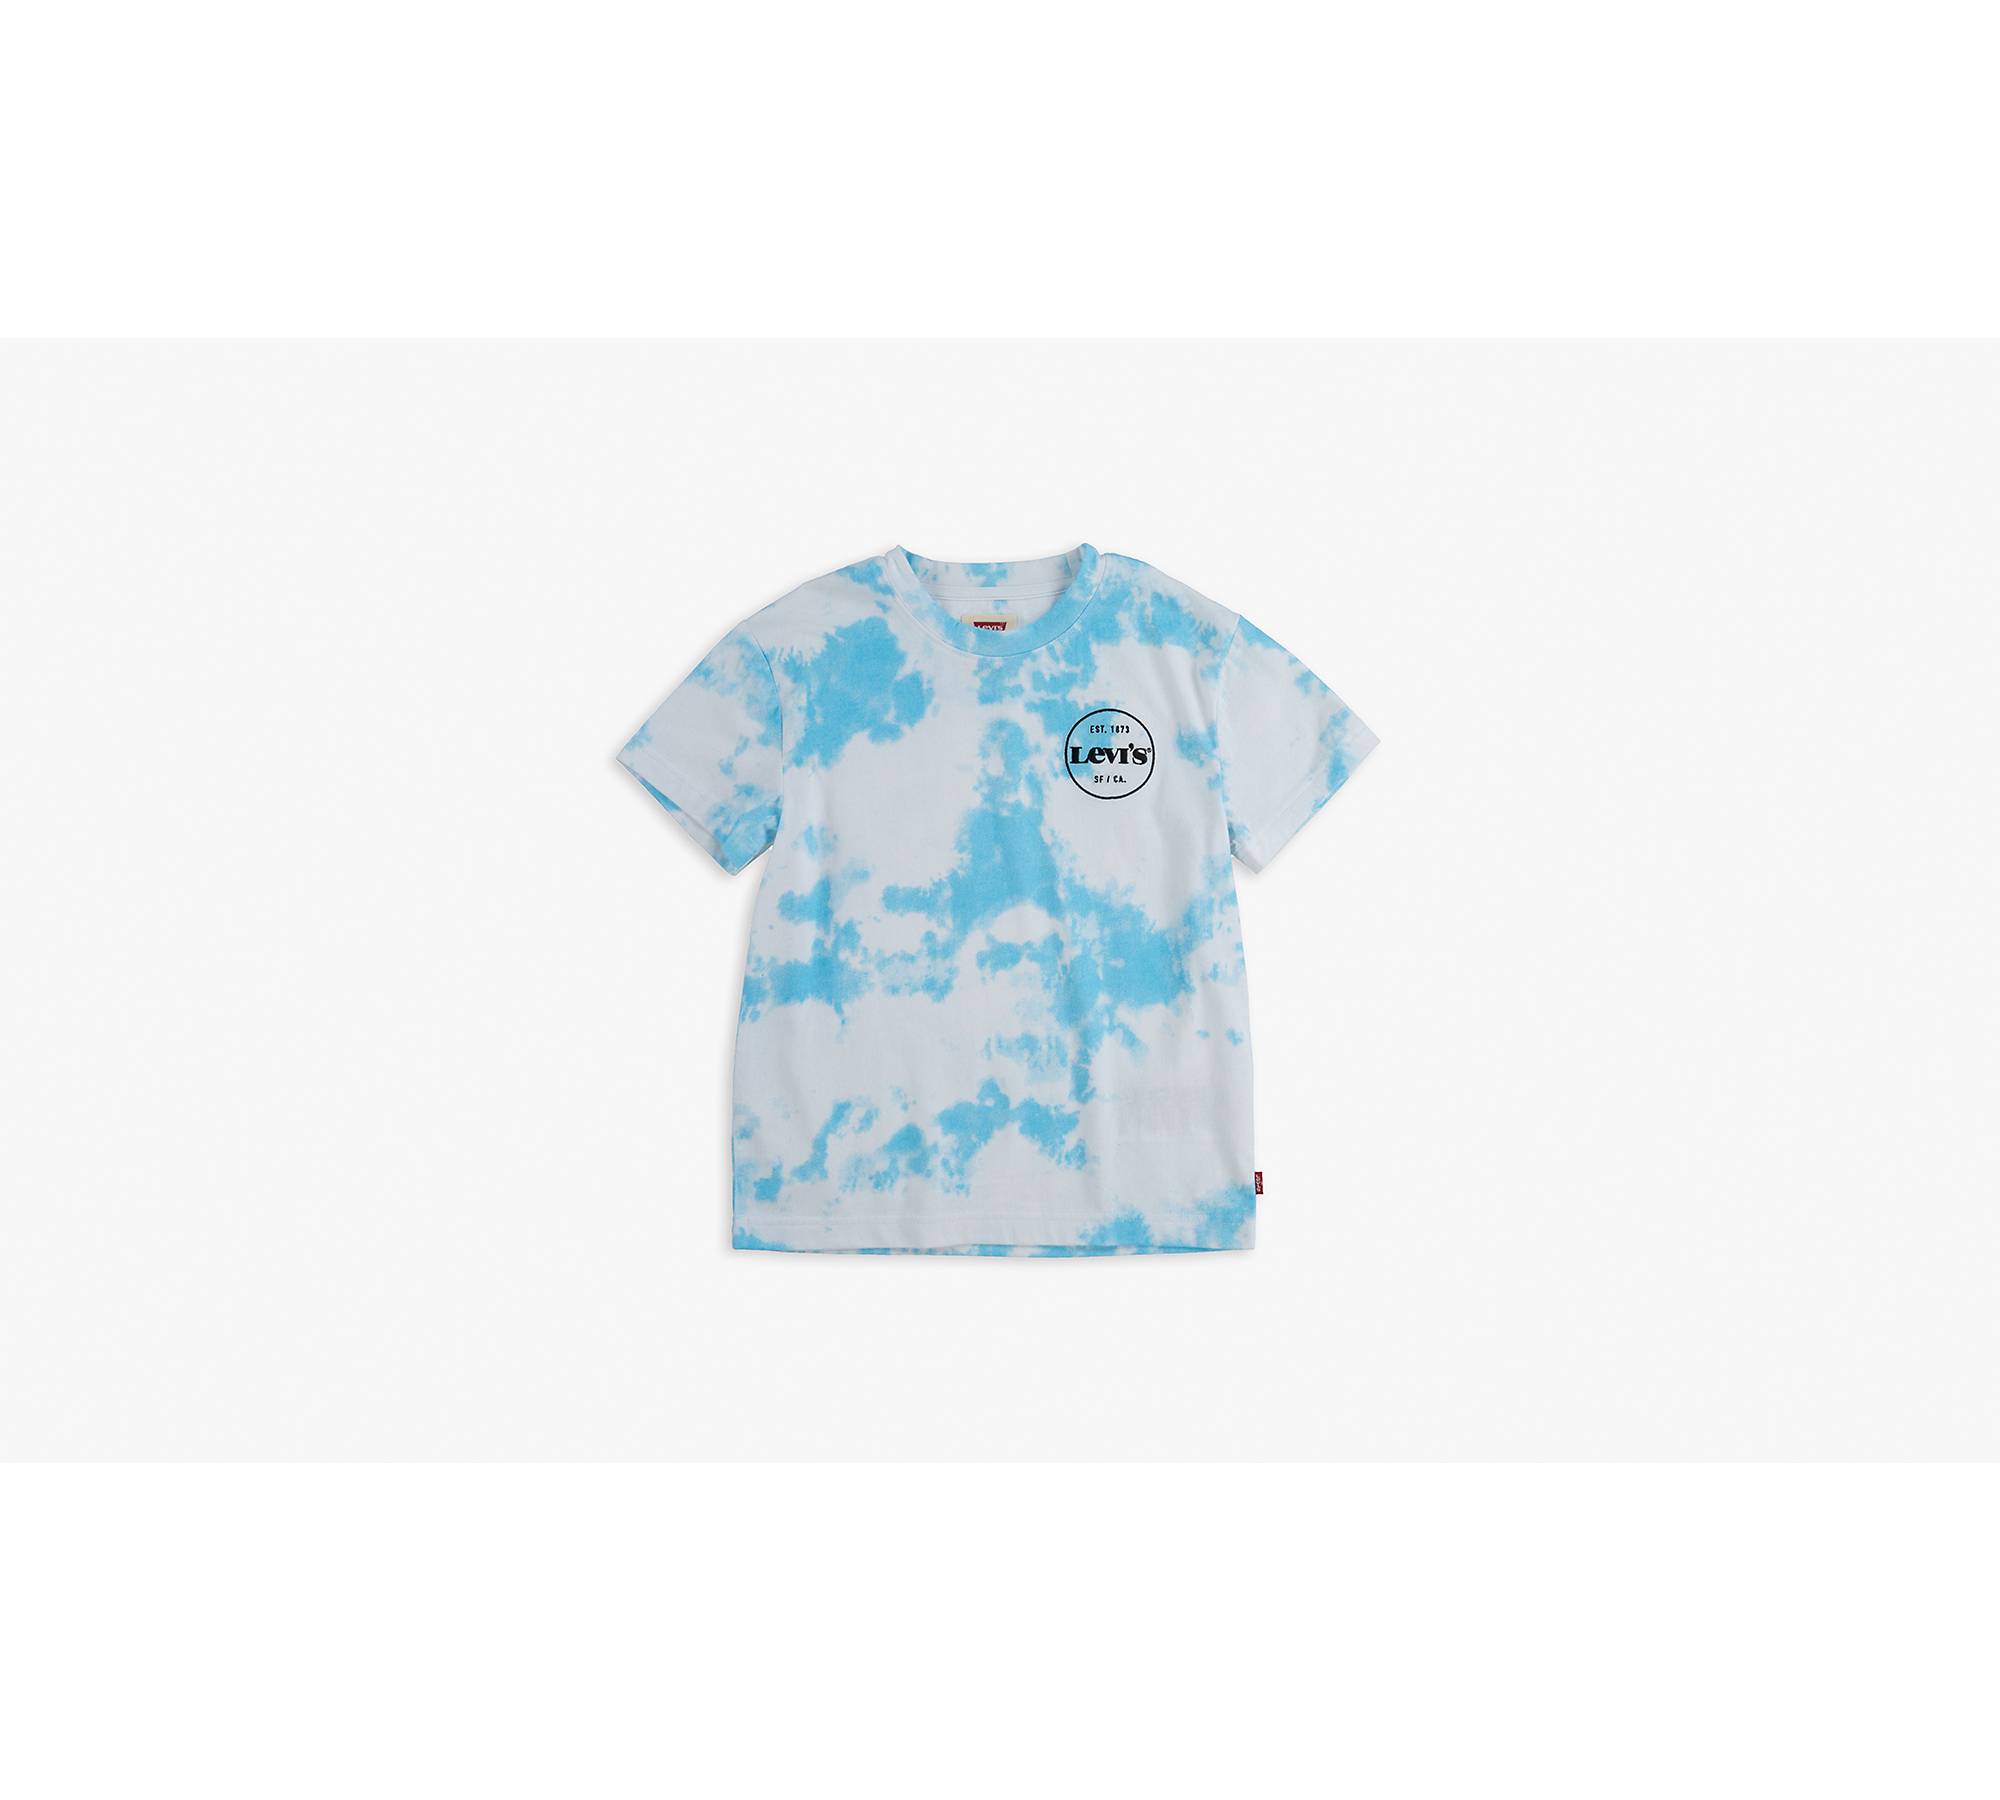 Toddler Boys 2t-4t Printed Tee Shirt - Blue | Levi's® US